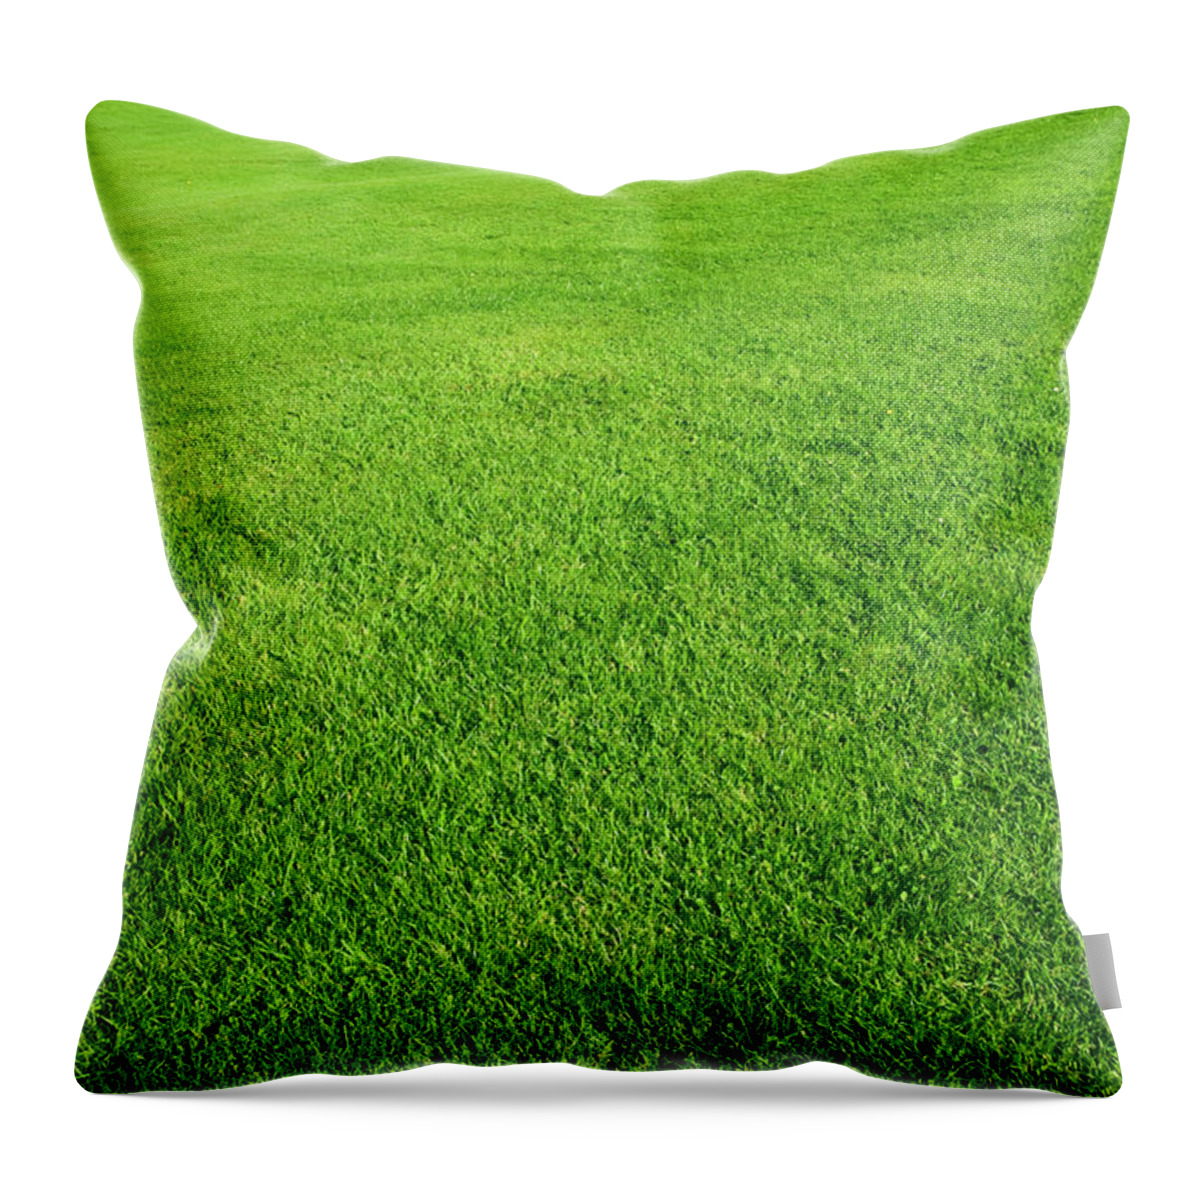 Scenics Throw Pillow featuring the photograph Green Grass Field by Rouzes